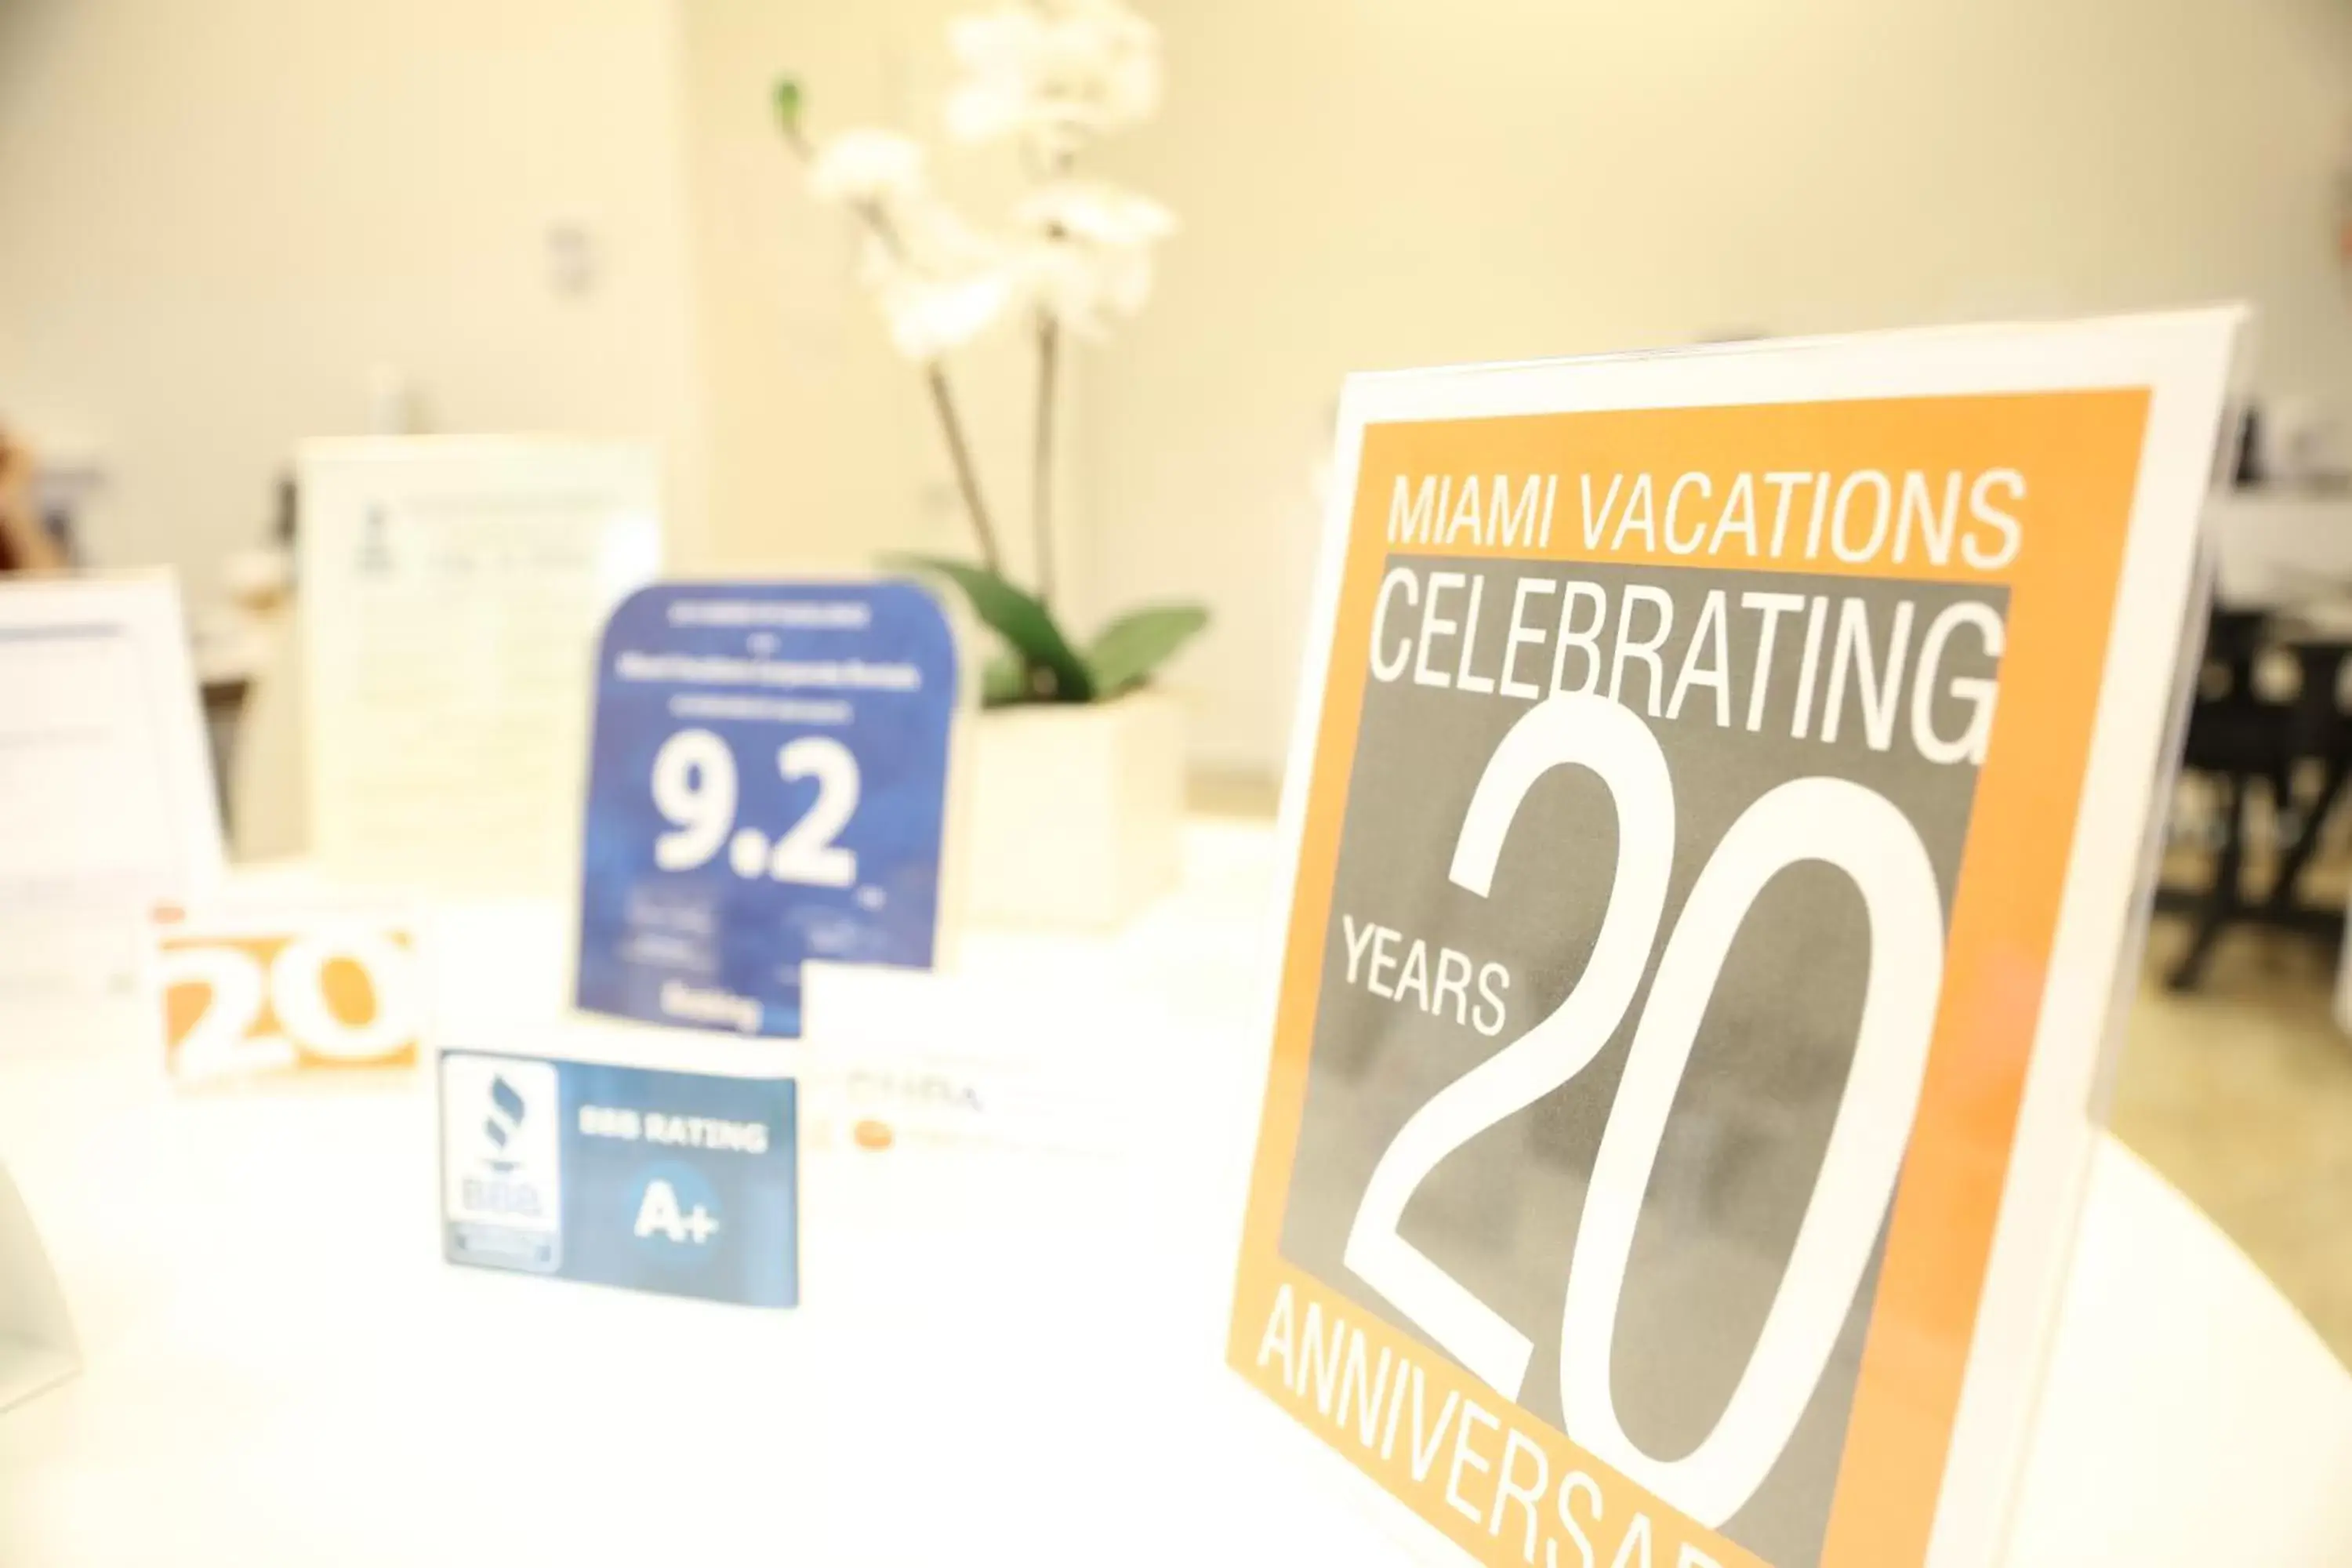 Decorative detail, Logo/Certificate/Sign/Award in Dadeland Towers by Miami Vacations